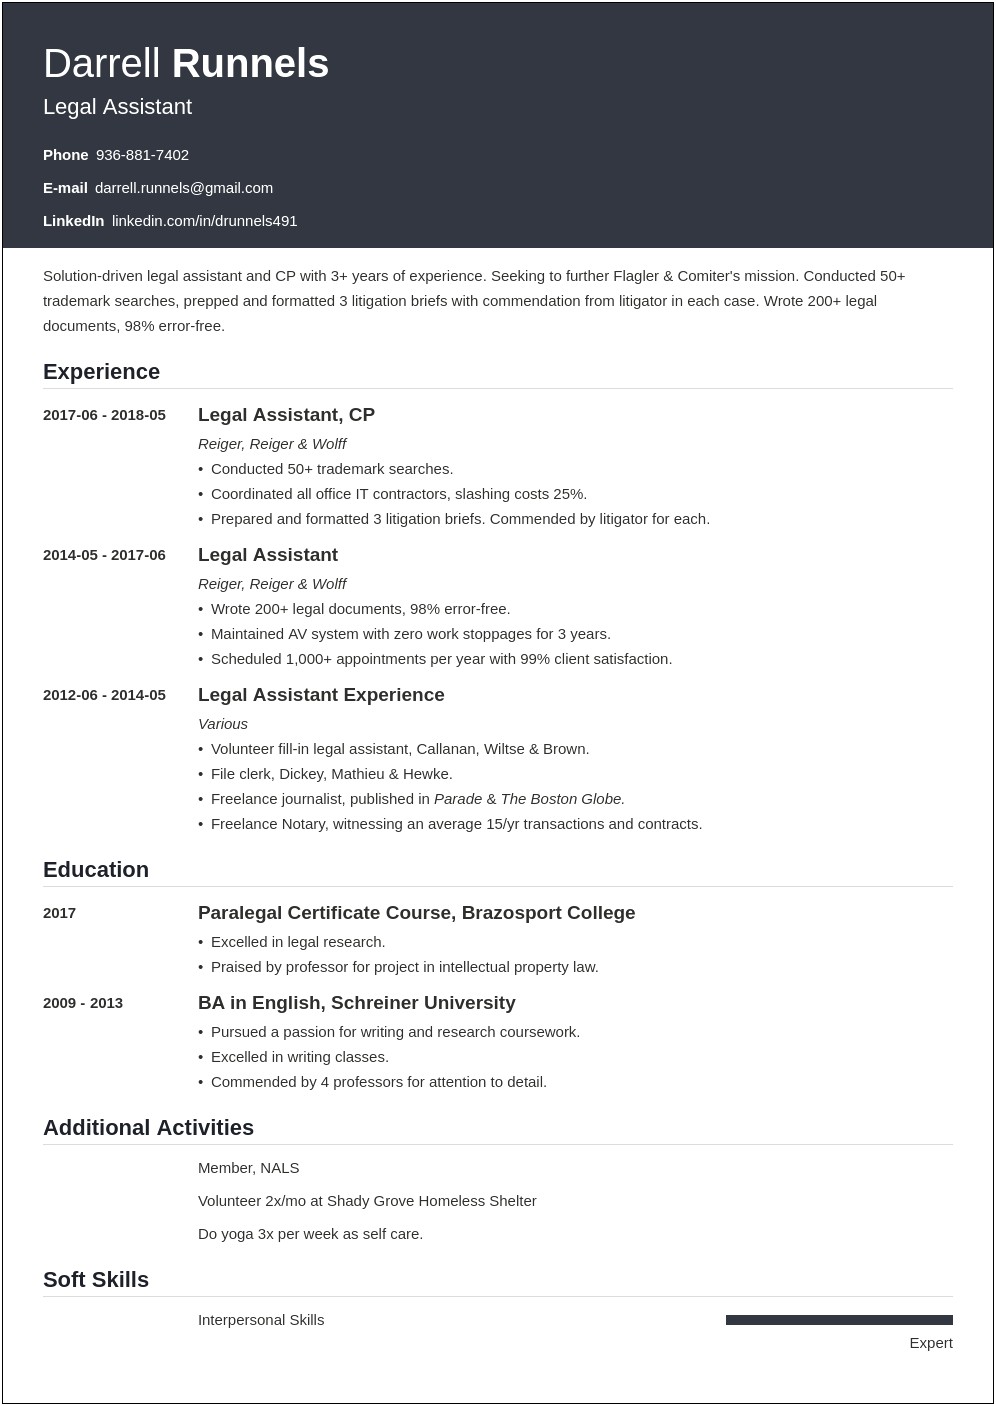 Legal Assistant Office Manager Resume